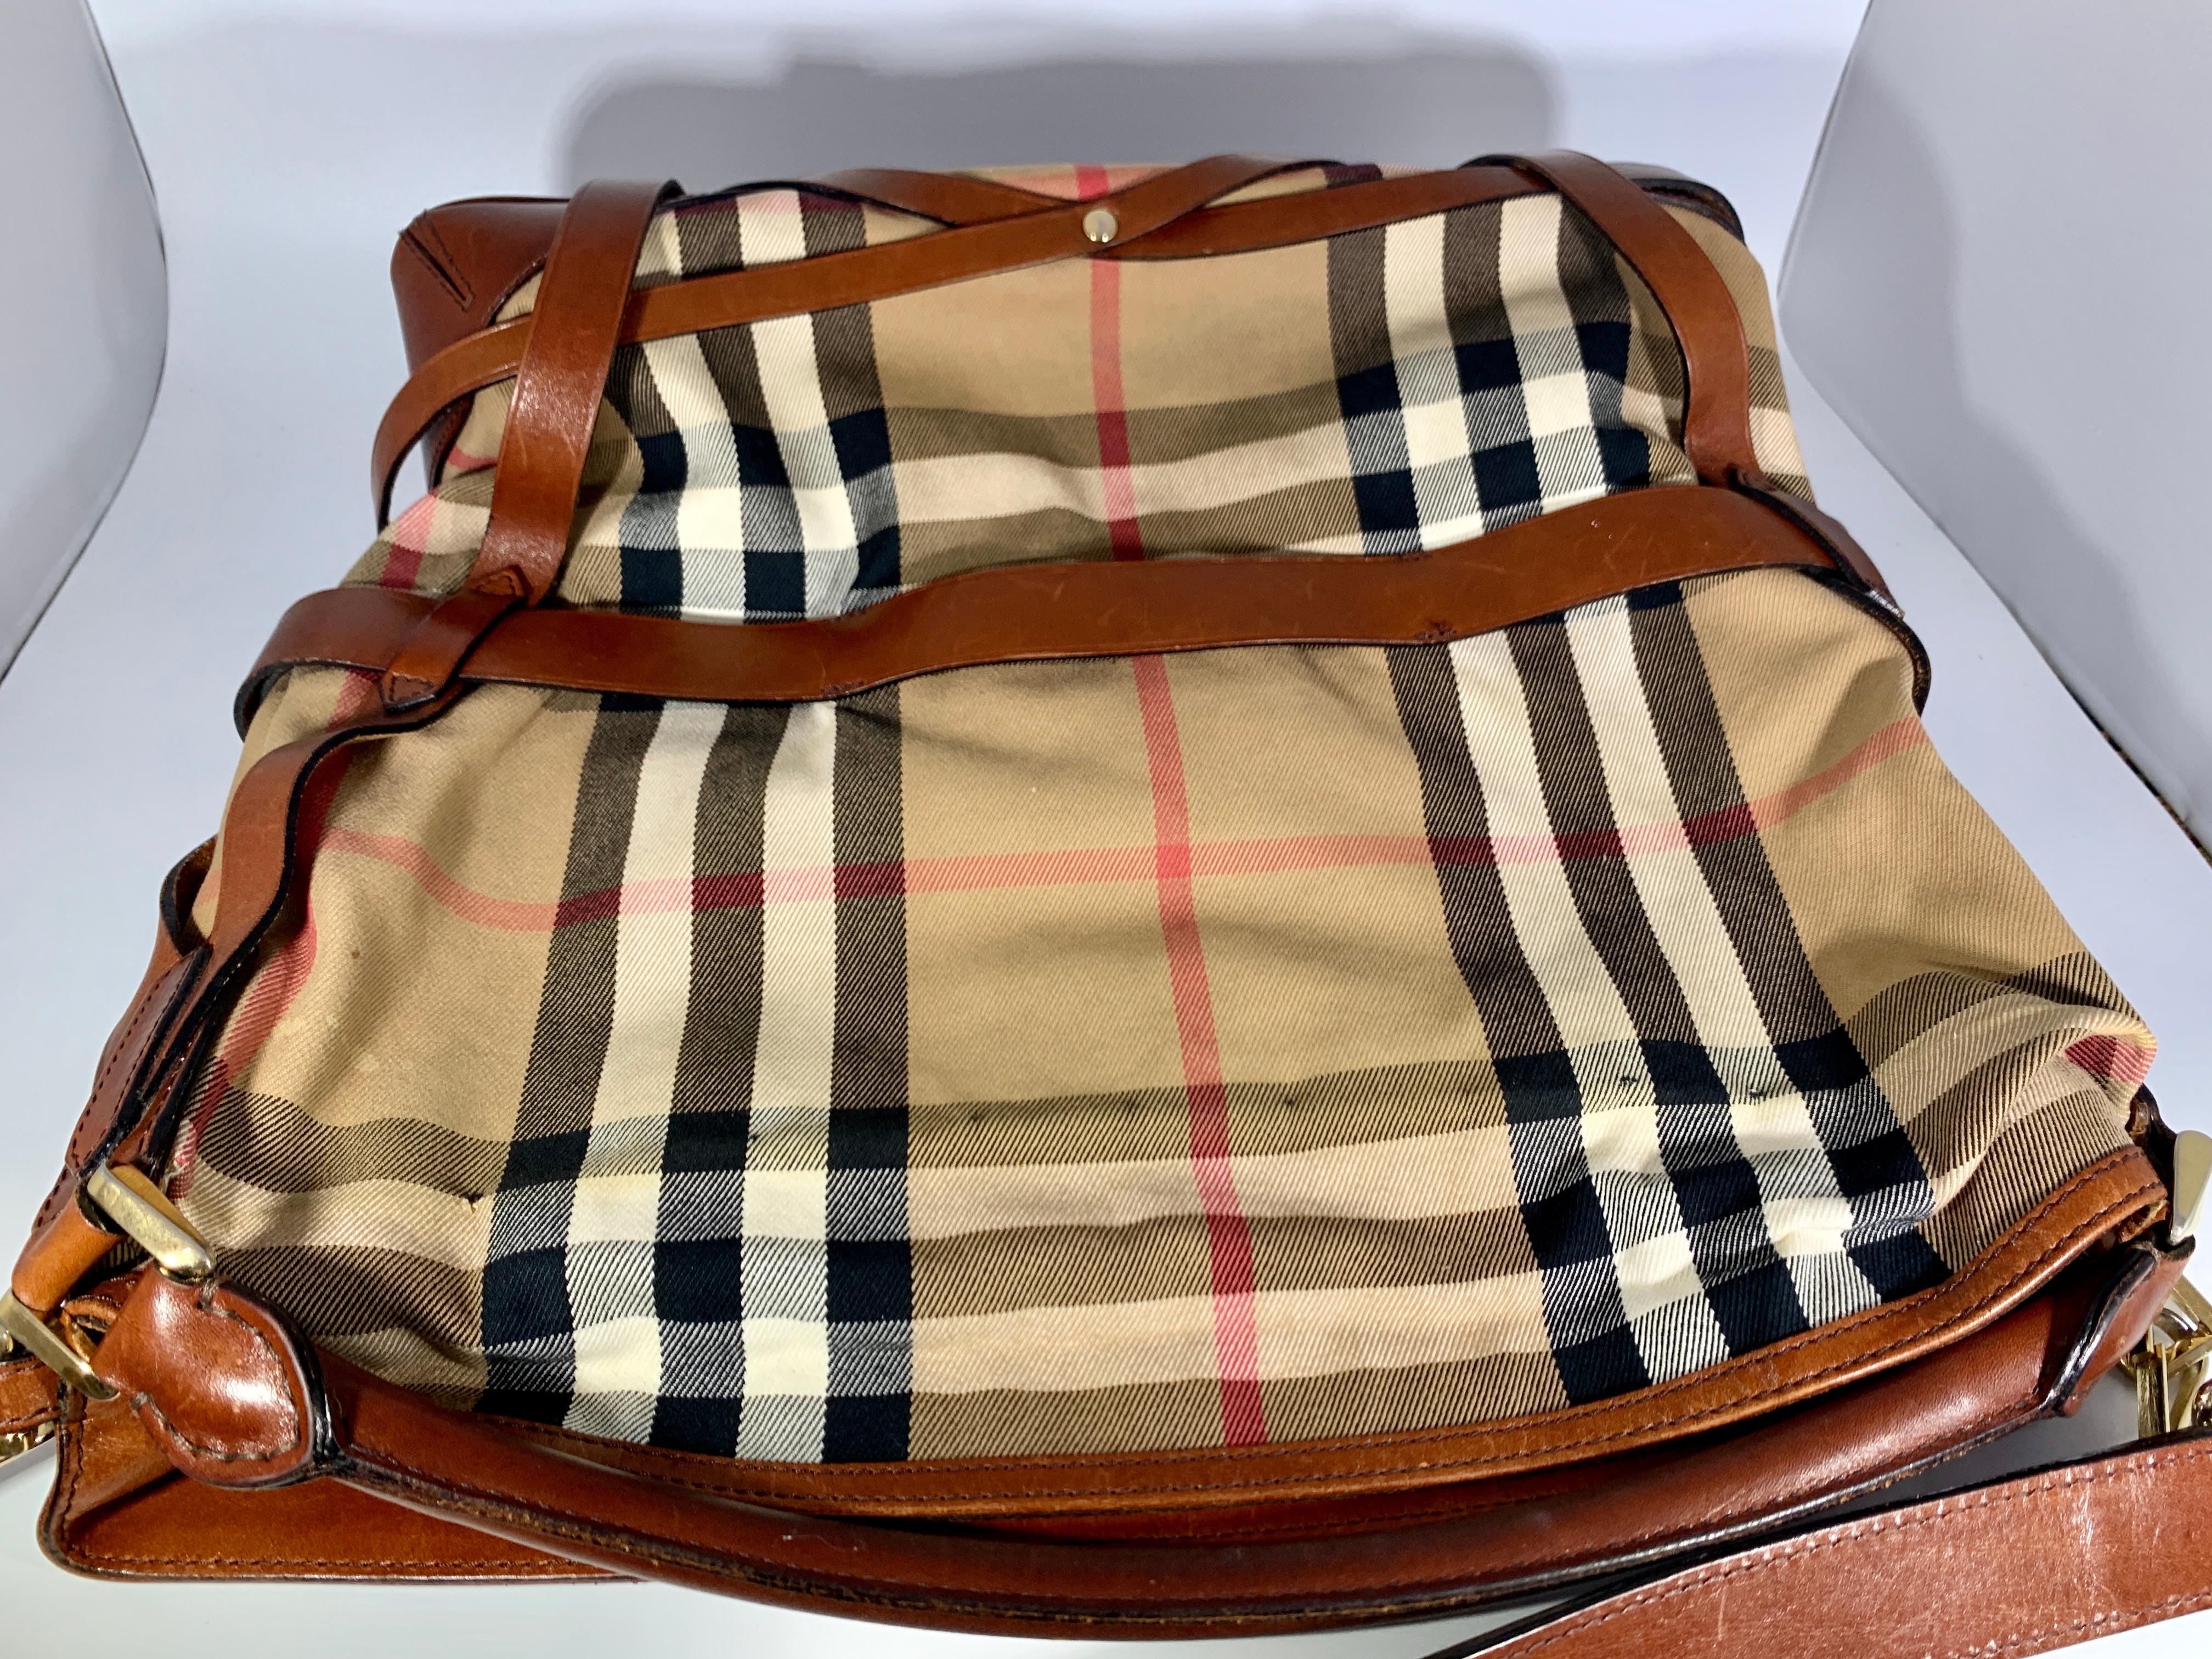  Bridle House Check Gosford Large Brown Leather Canvas Hobo Bag 2